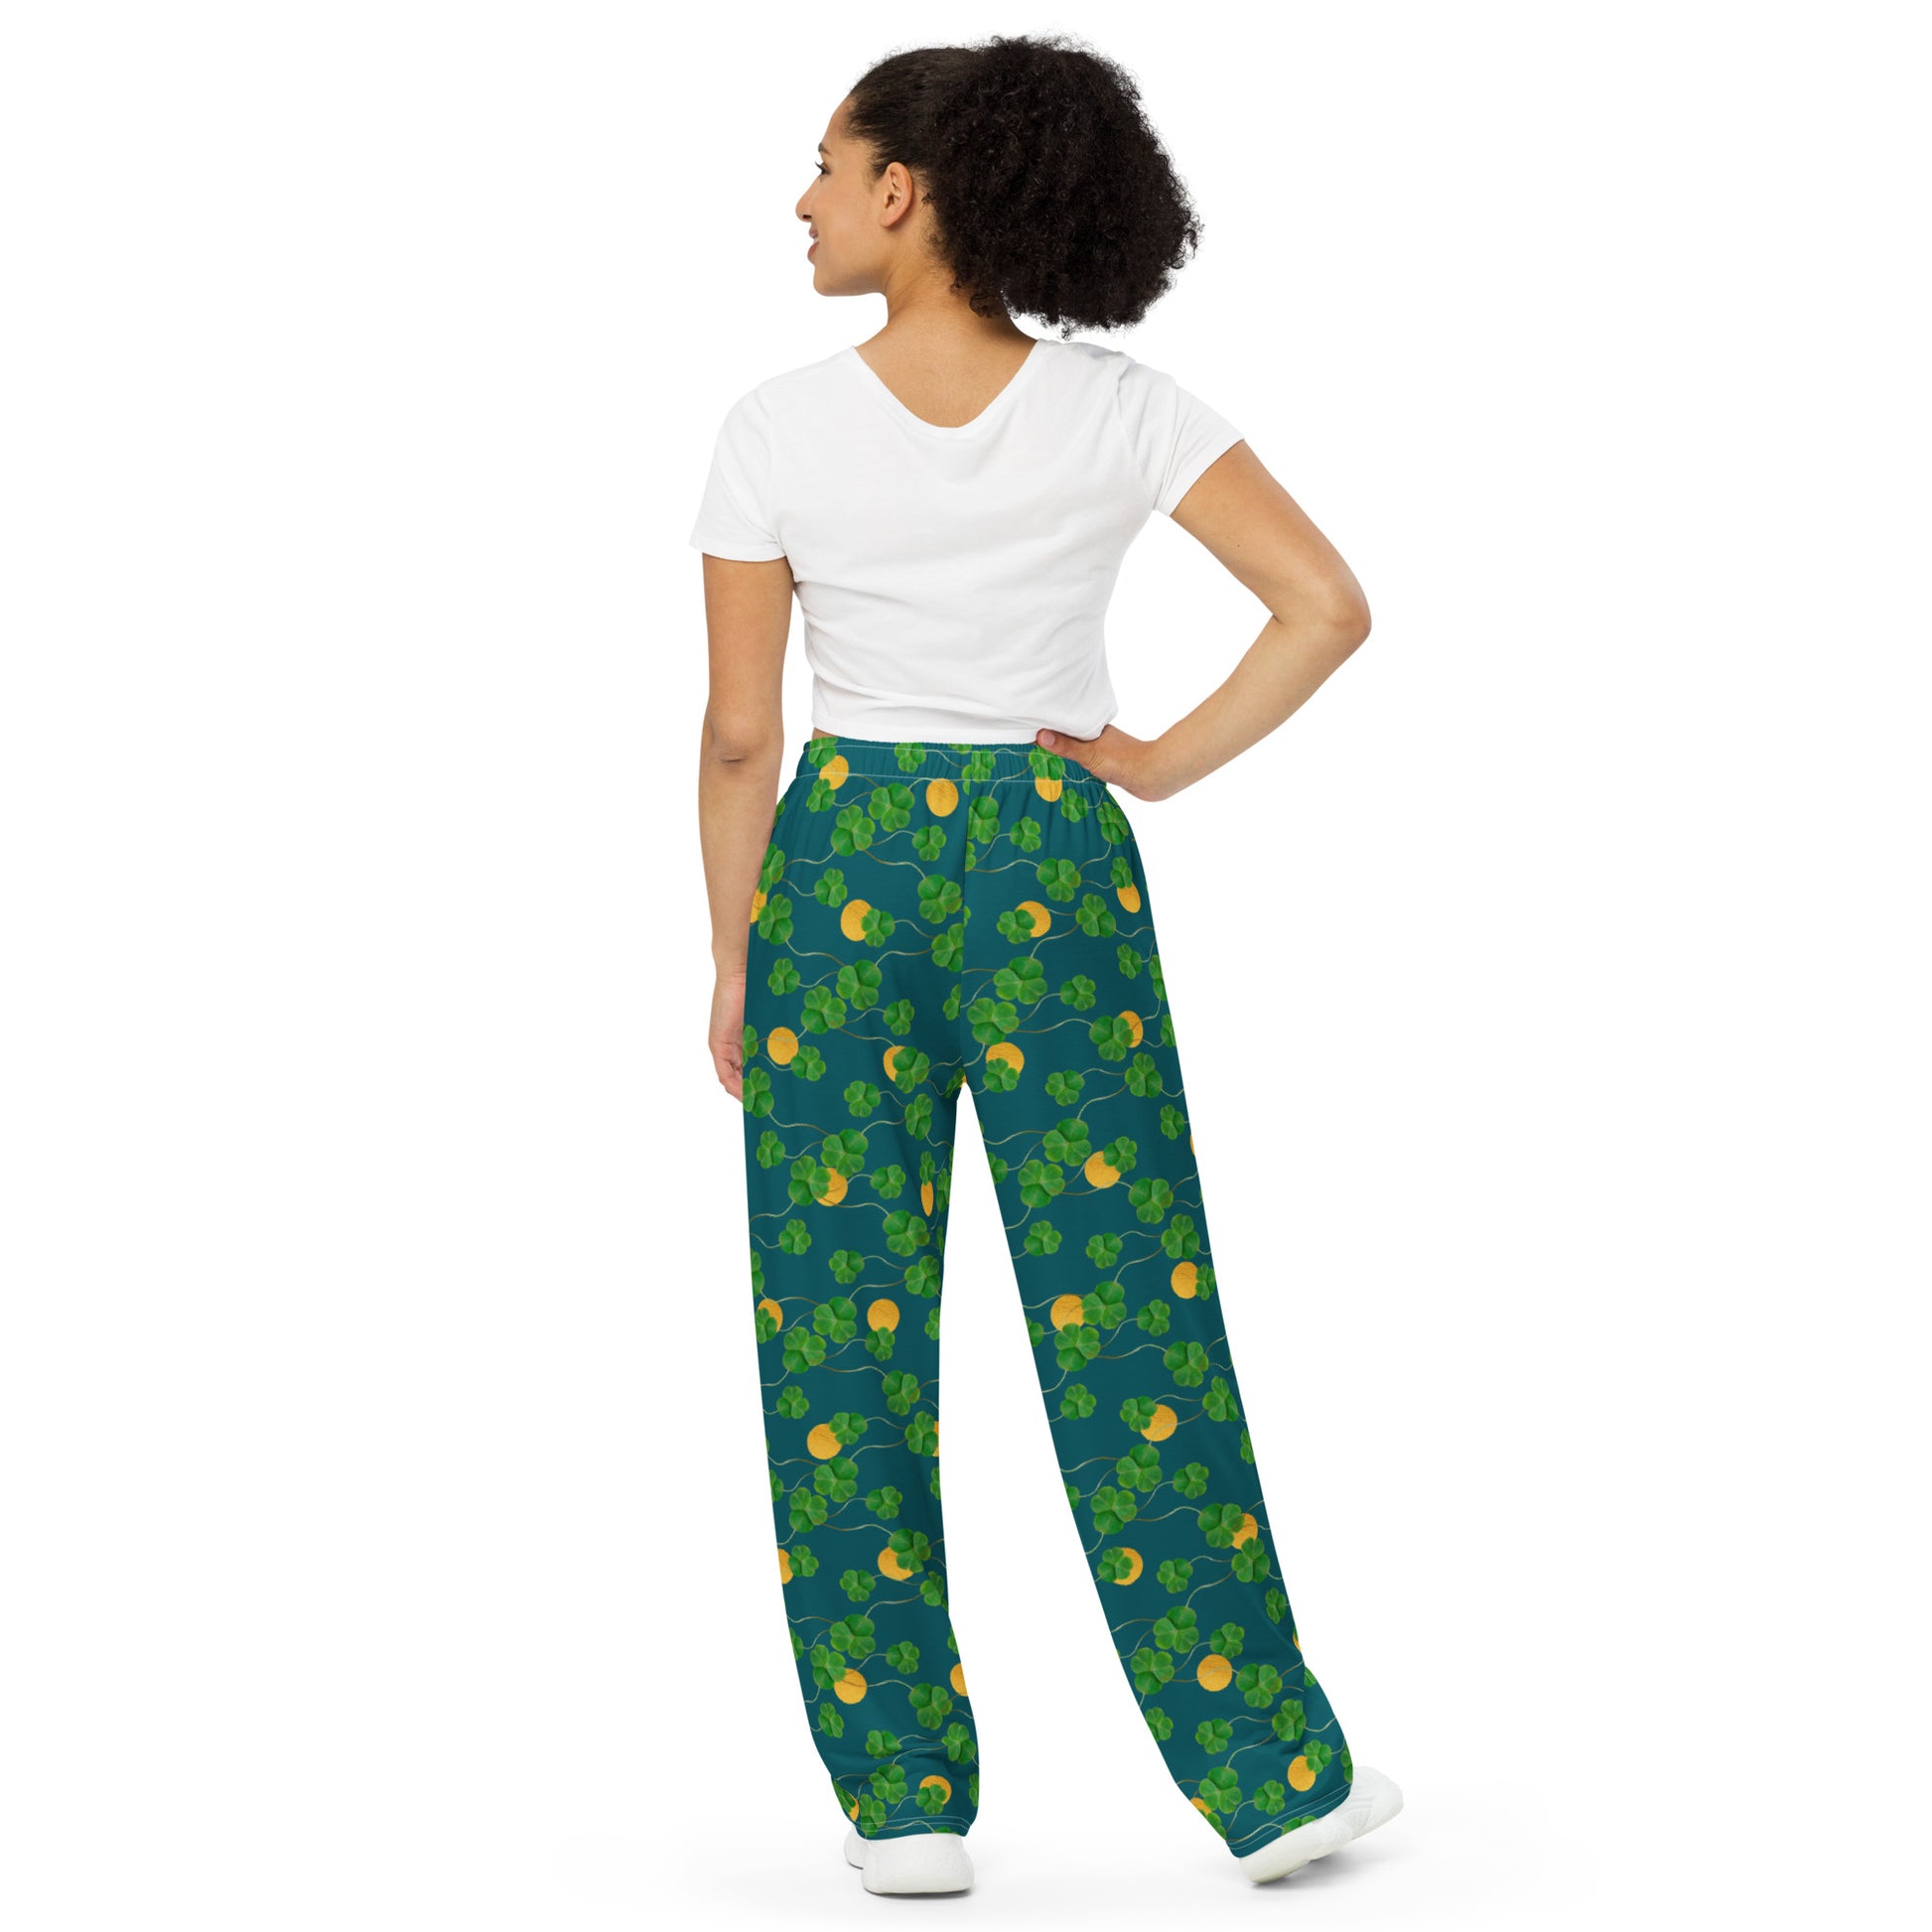 Unisex wide leg pants with side pockets, elastic waistband and drawstring.  Design features pattern of three-leaf clover and lucky gold coins on a blue-green background. Back view on female model.